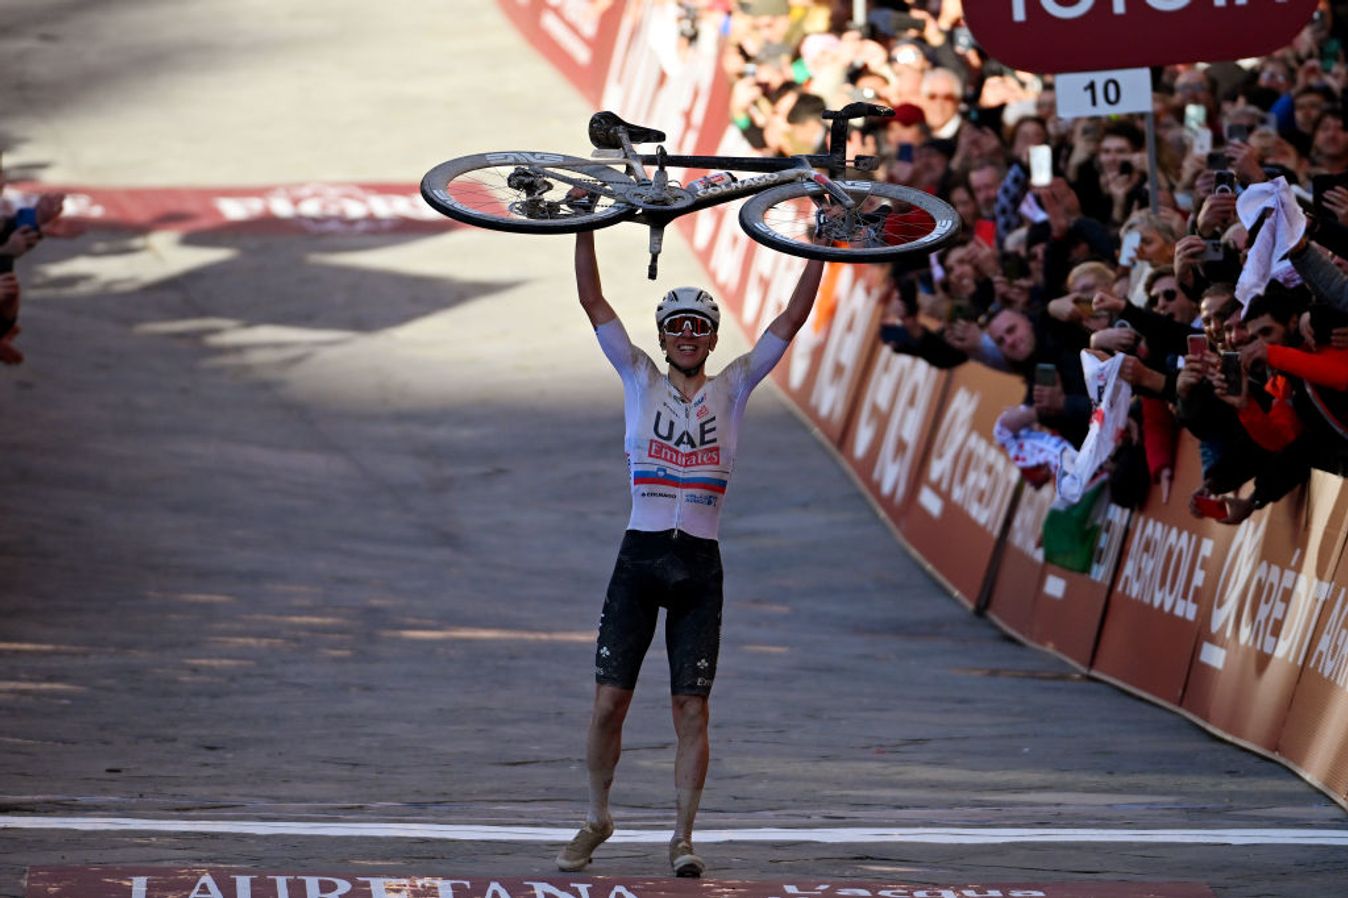 Pogačar comes in off the back of a historic solo victory at Strade Bianche